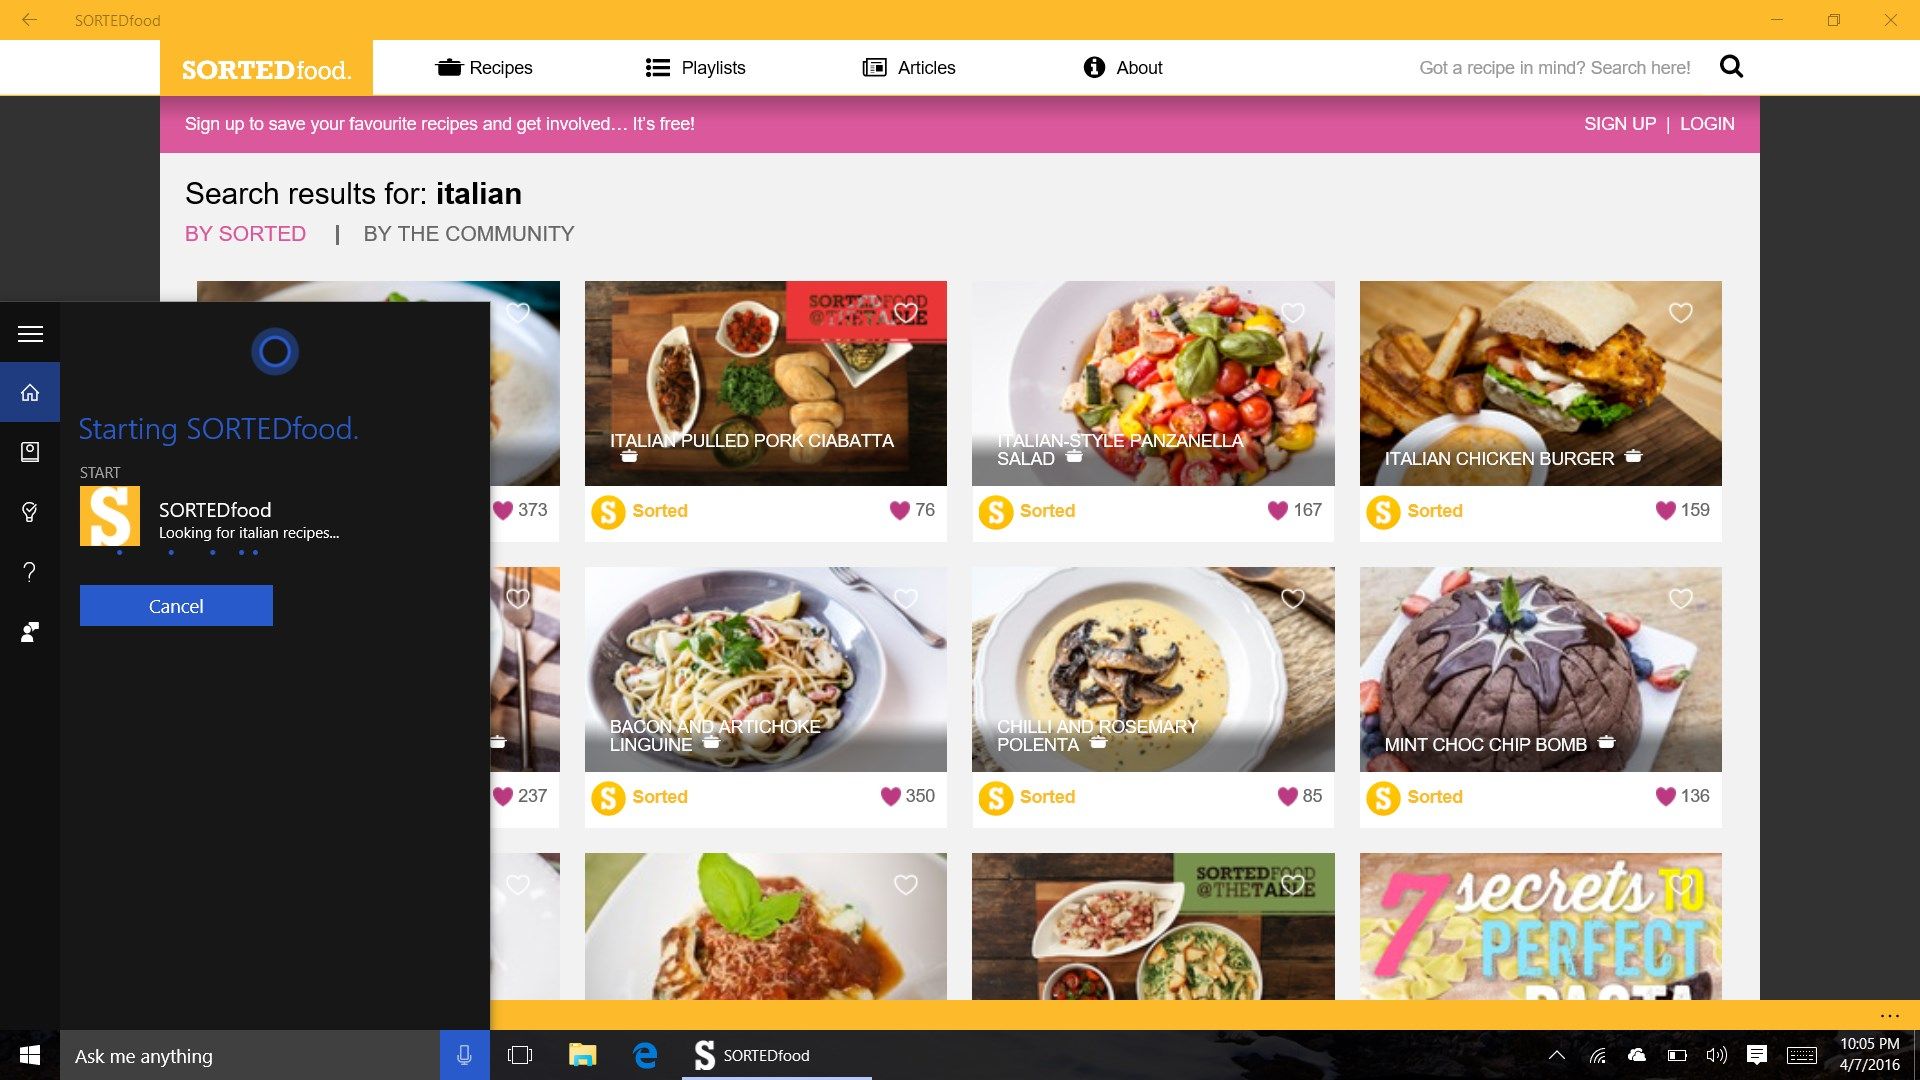 Need to find that recipe you were looking for? Search away! Or use Cortana to look up ideas with your voice.